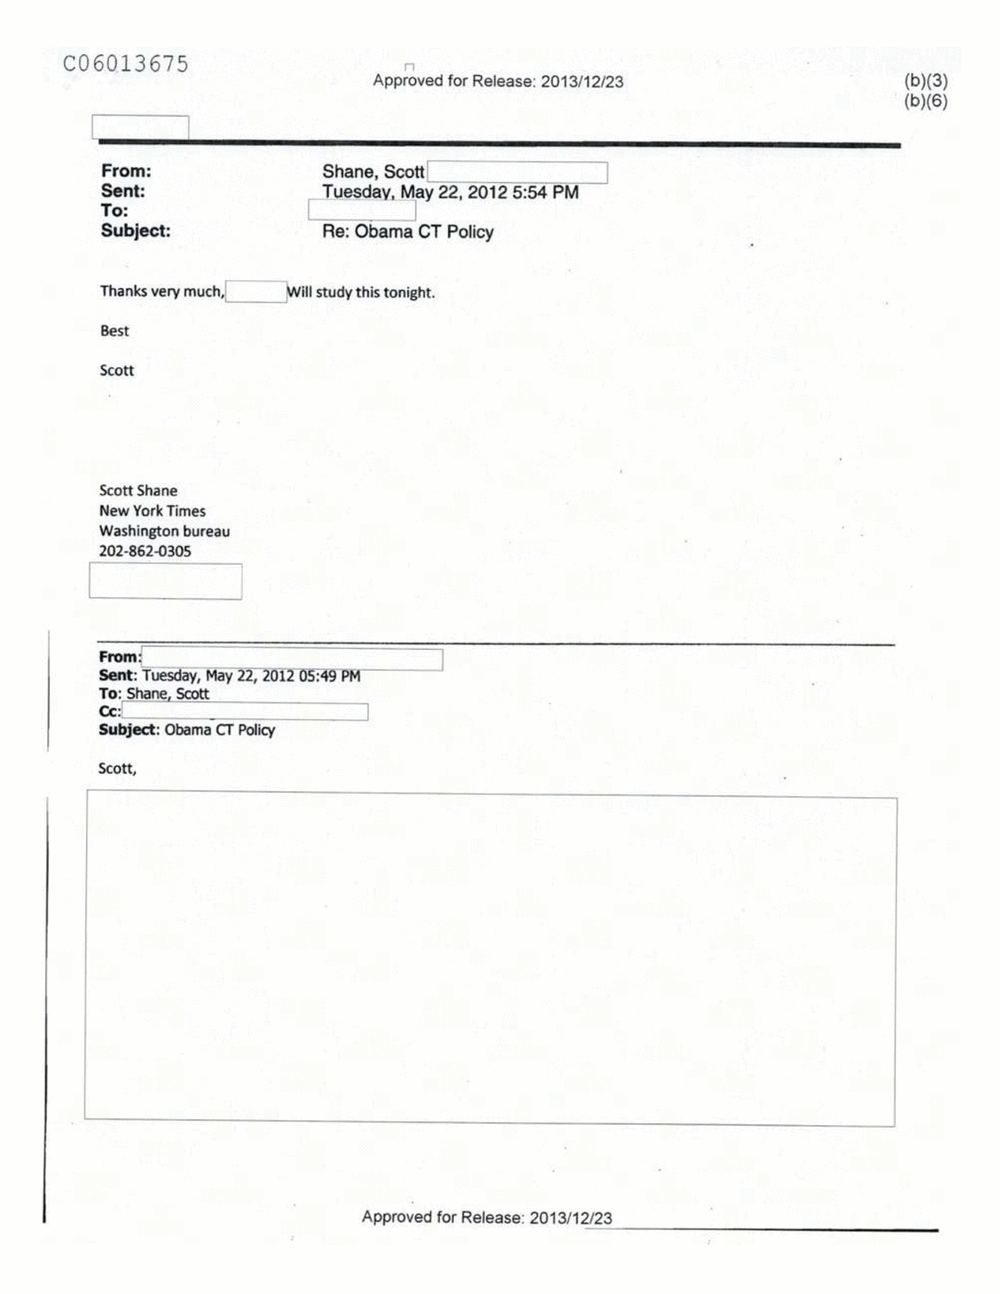 Page 527 from Email Correspondence Between Reporters and CIA Flacks